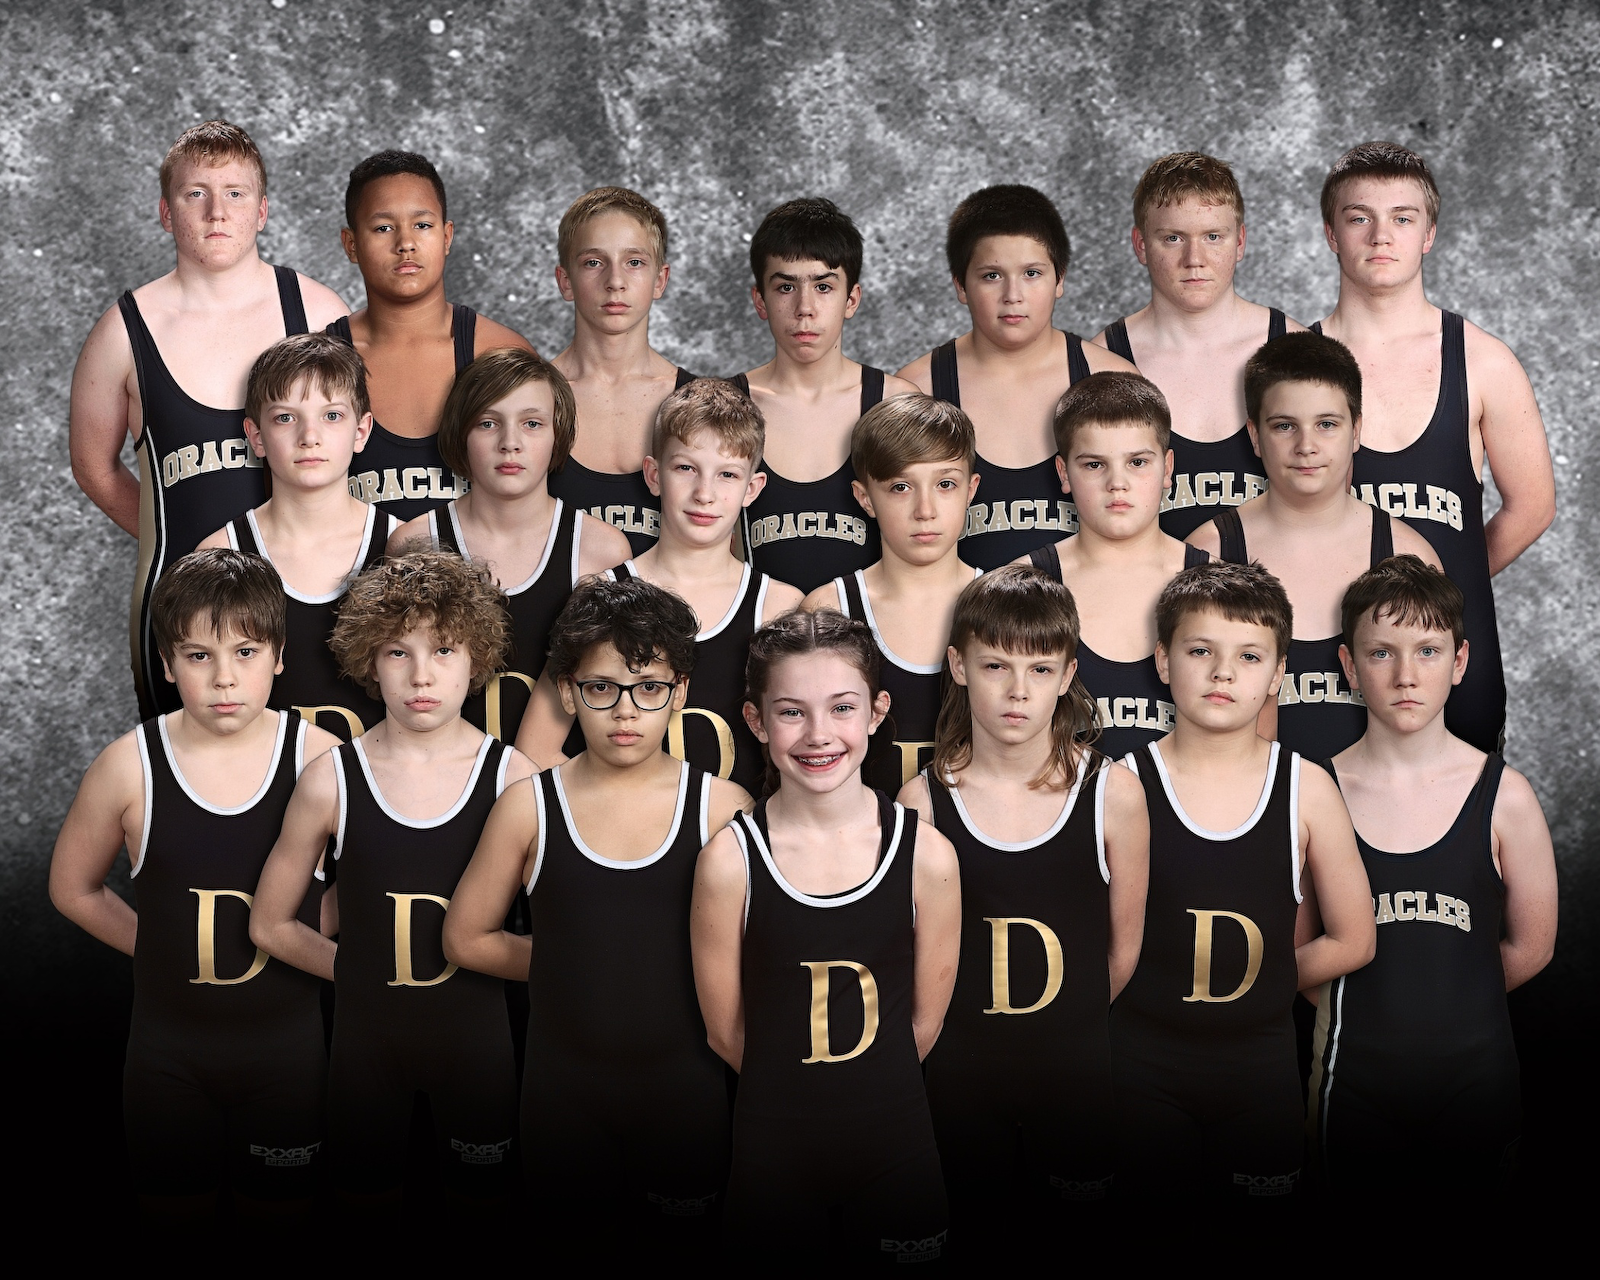 MS Wrestling gallery cover photo